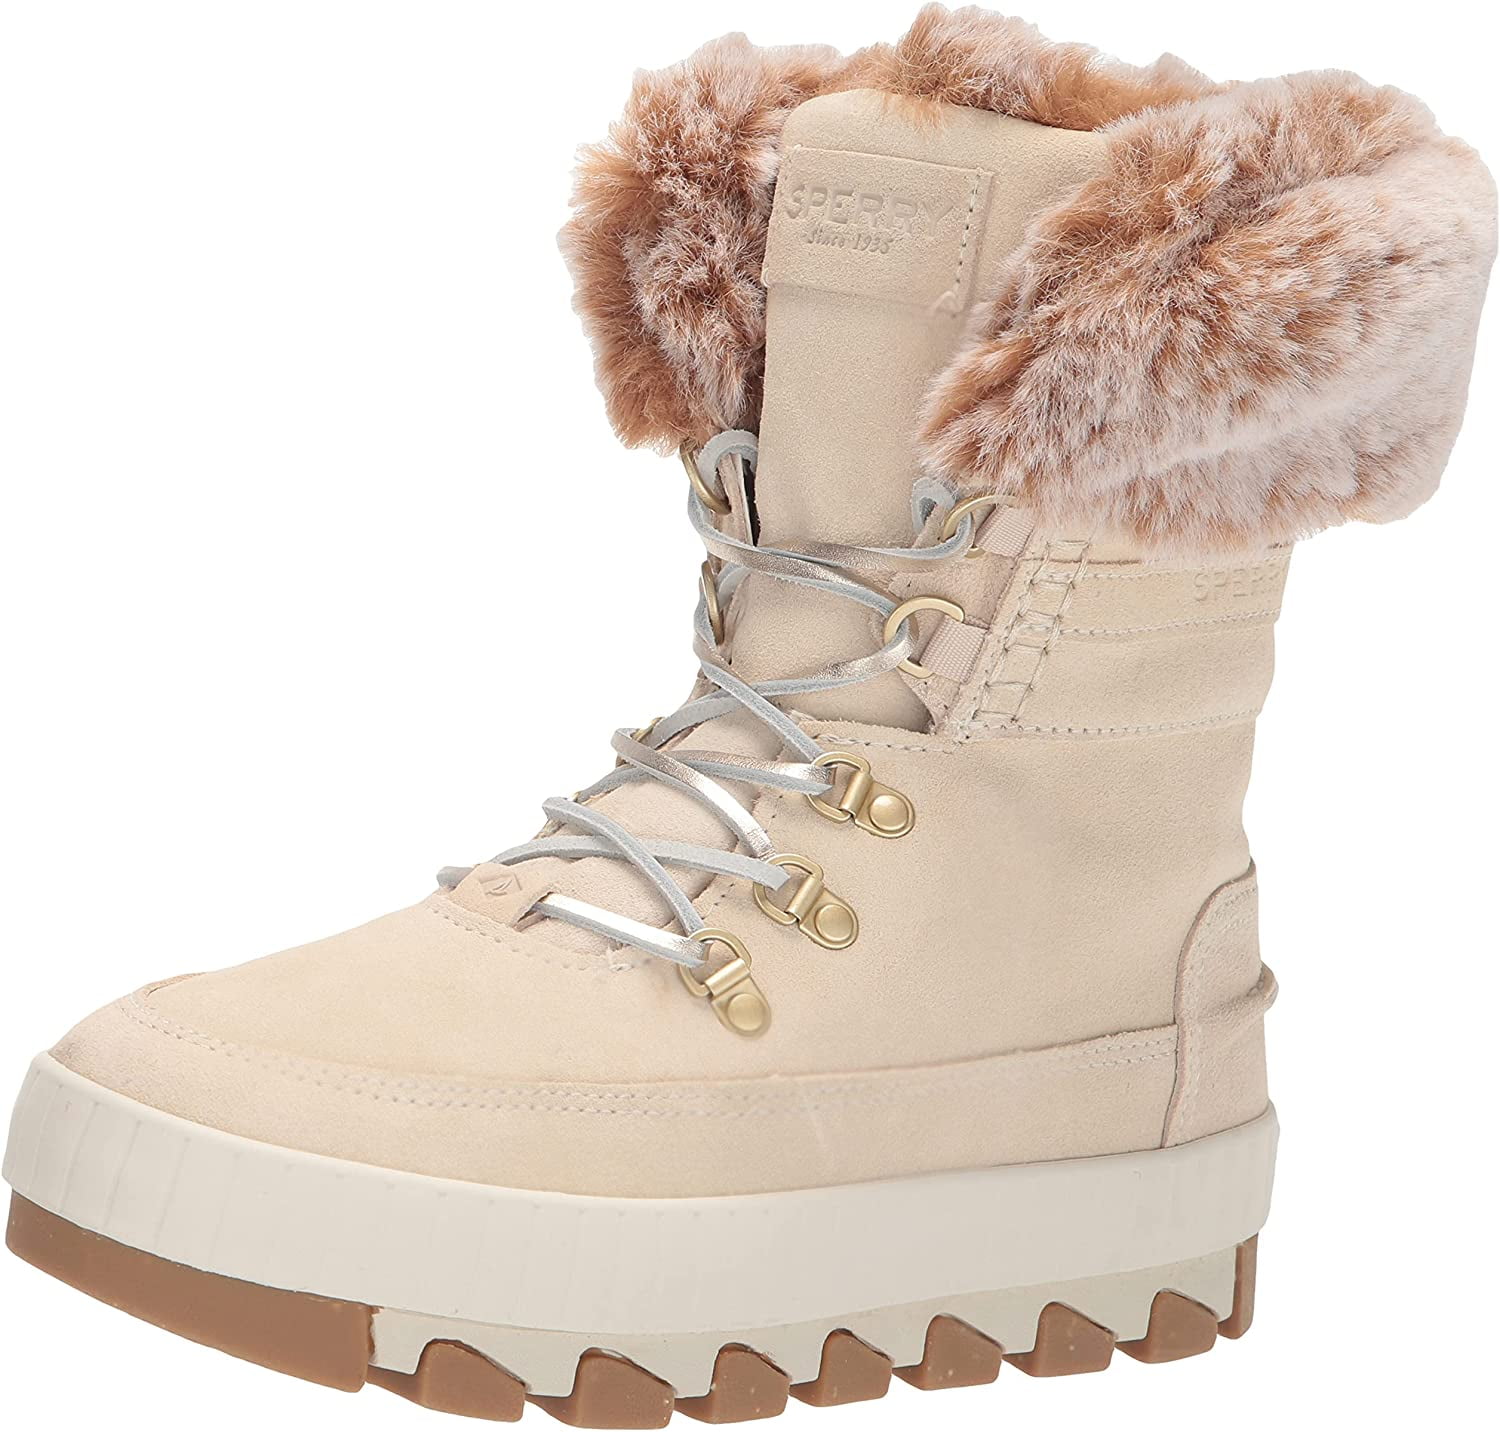 Sperry Women's Torrent Winter Lace Up Boot in Ivory, 9 US - Walmart.com